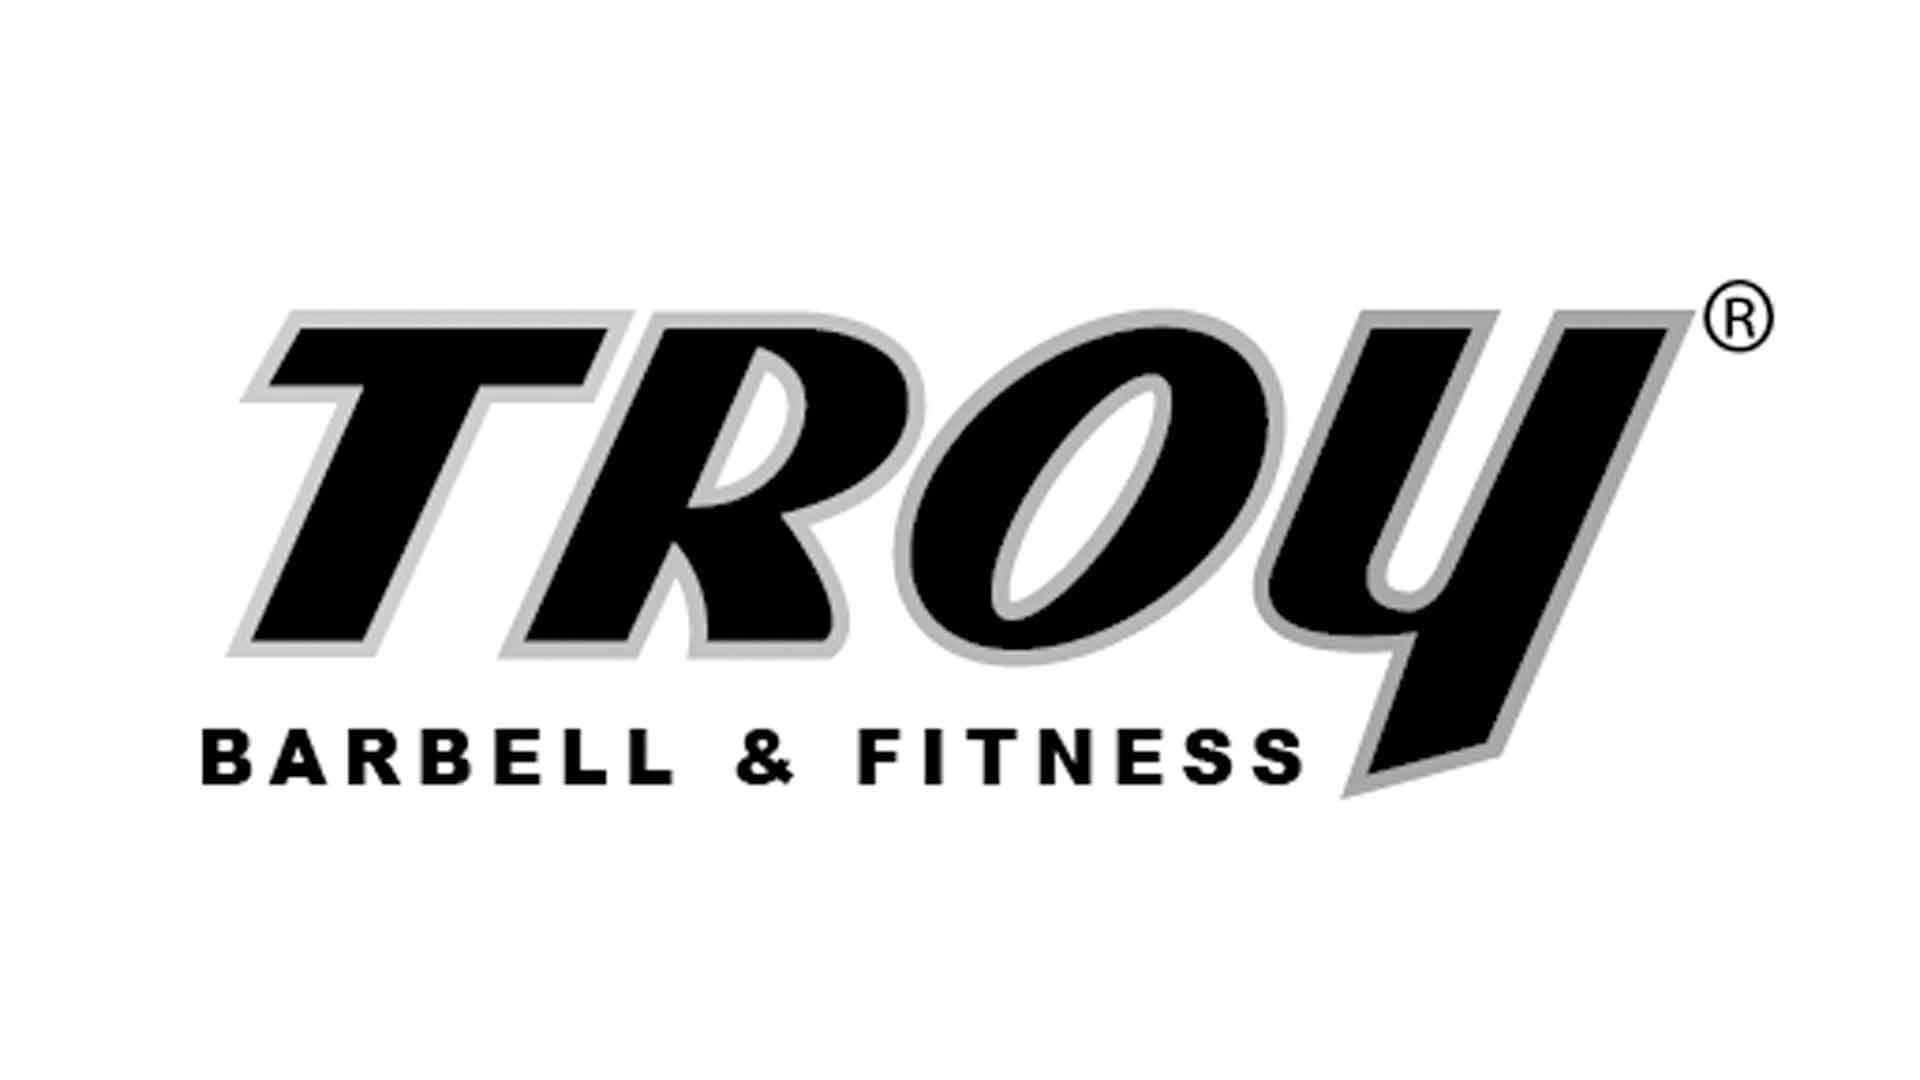 A black and white logo of troy bell & fitness.